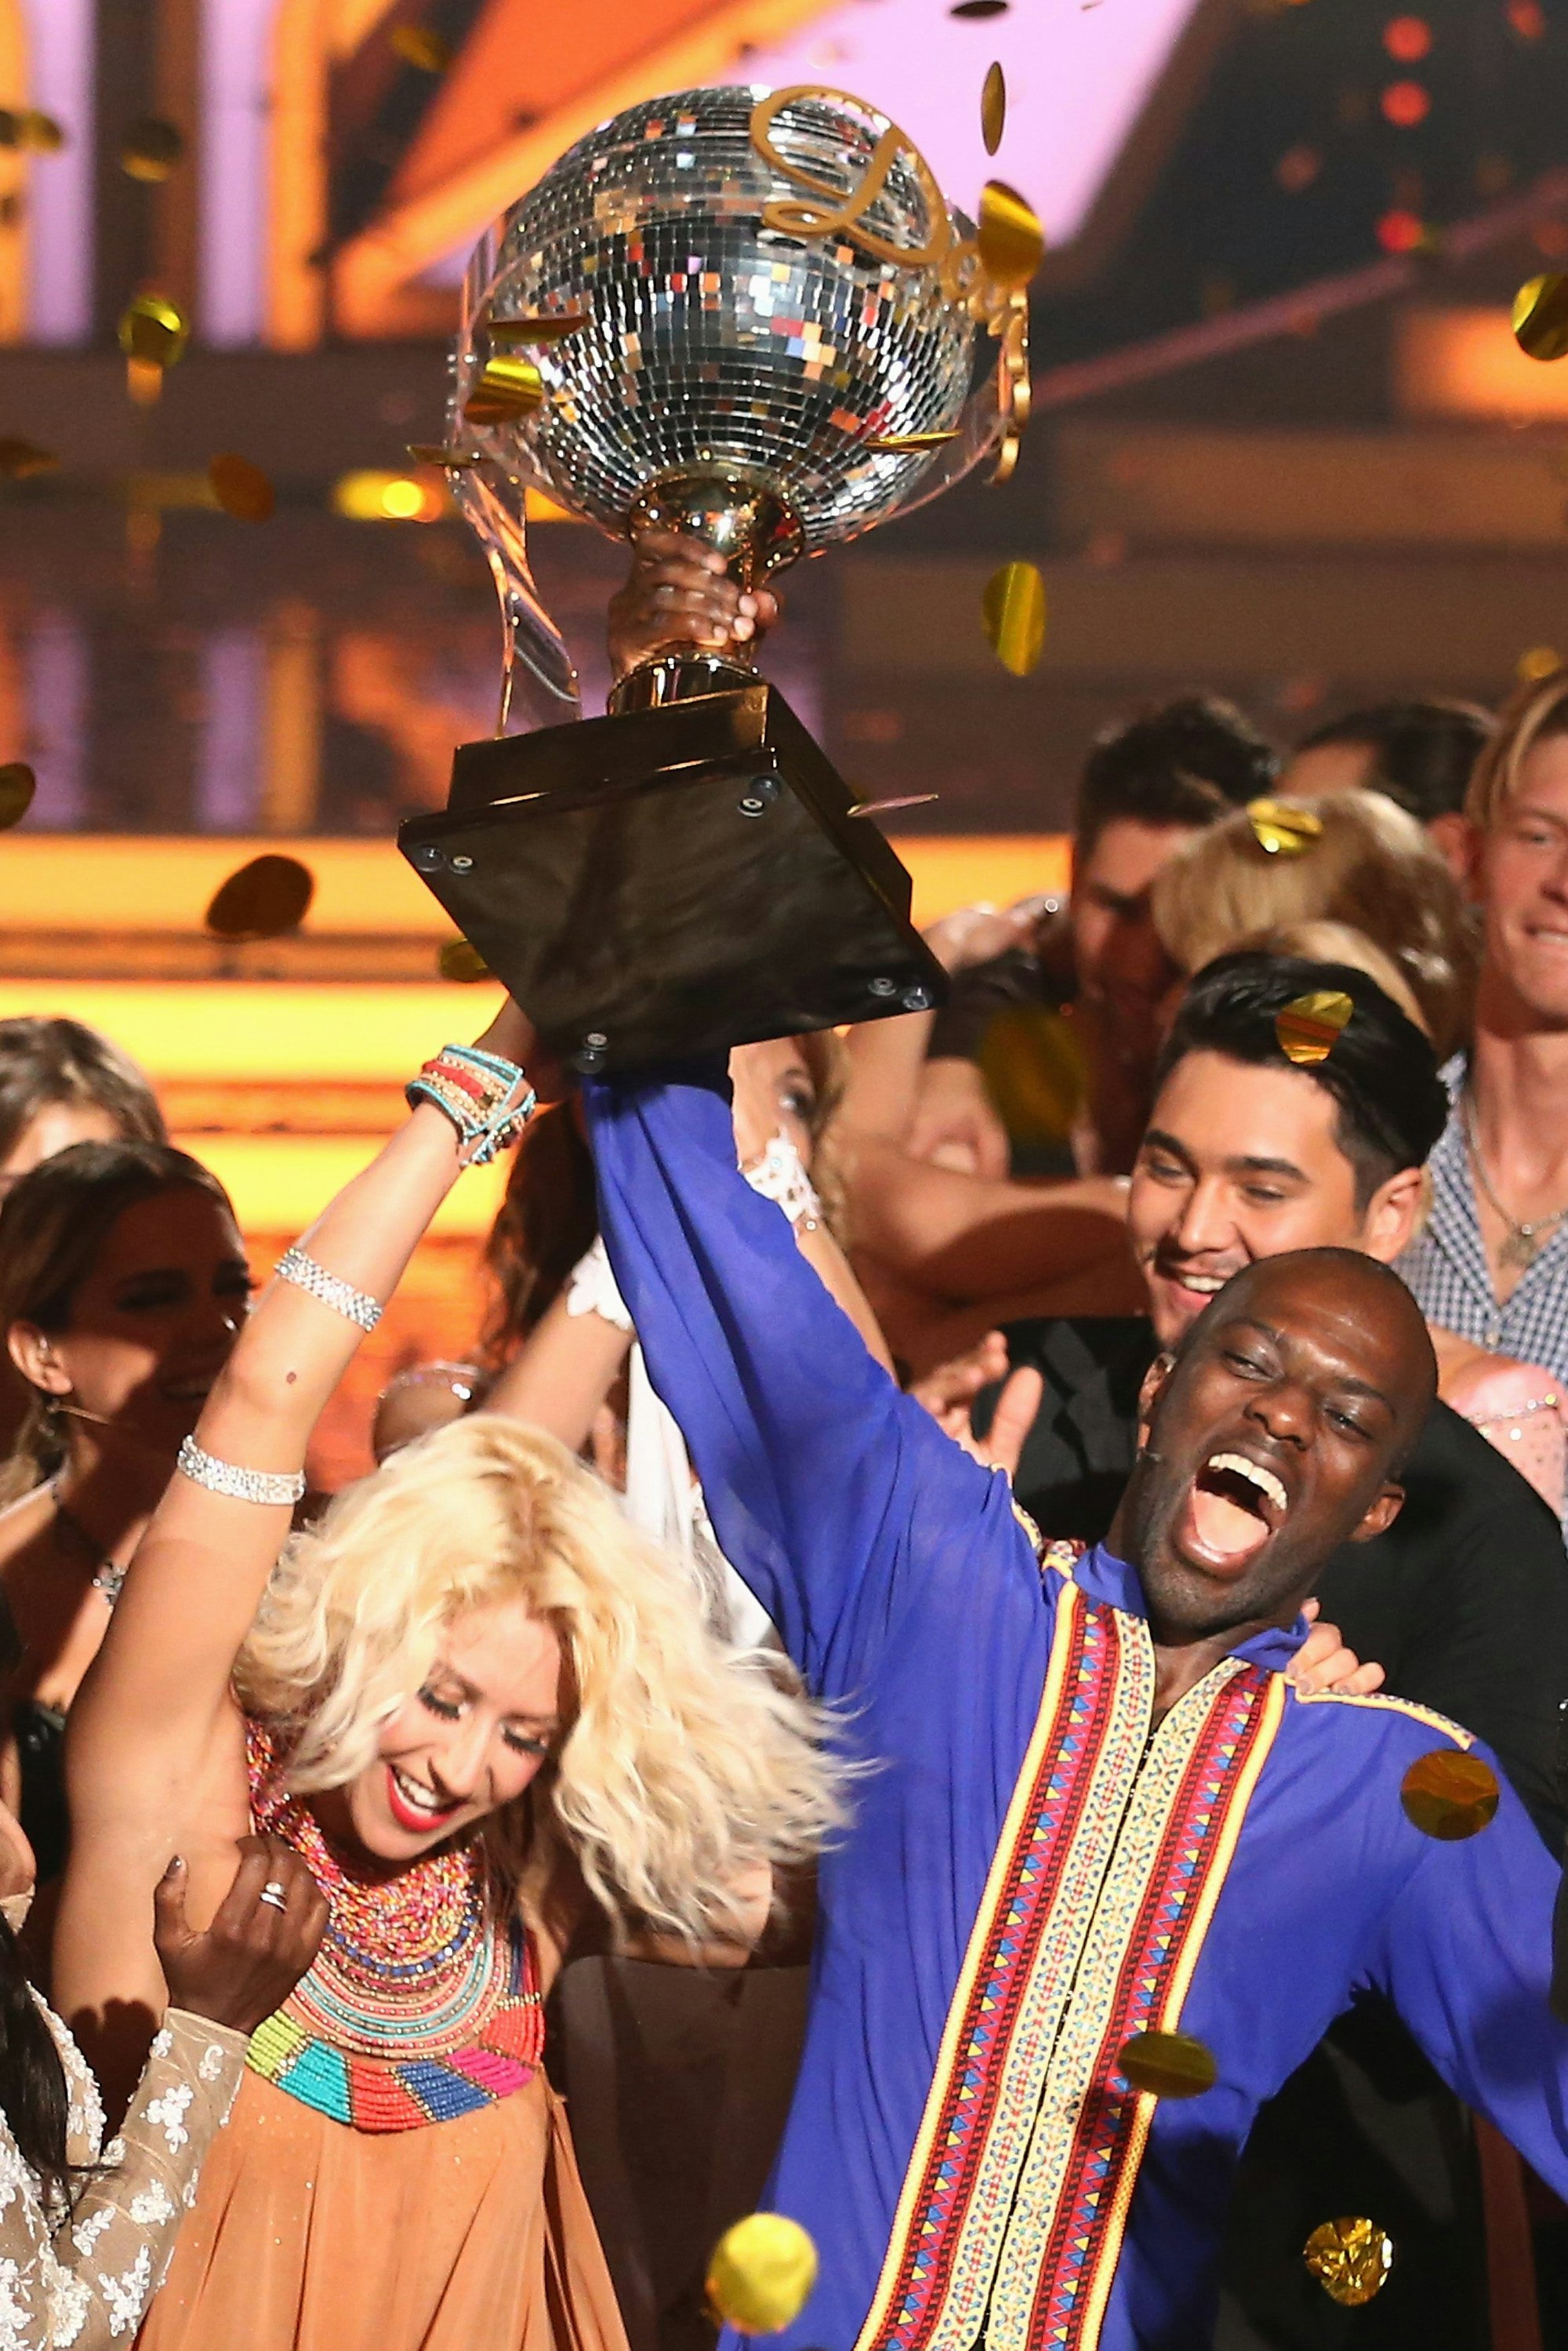 COLOGNE, GERMANY - JUNE 05:  Hans Sarpei and Kathrin Menzinger celebrate after winning the award during the final show of the television competition 'Let's Dance' on June 5, 2015 in Cologne, Germany.  (Photo by Andreas Rentz/Getty Images)